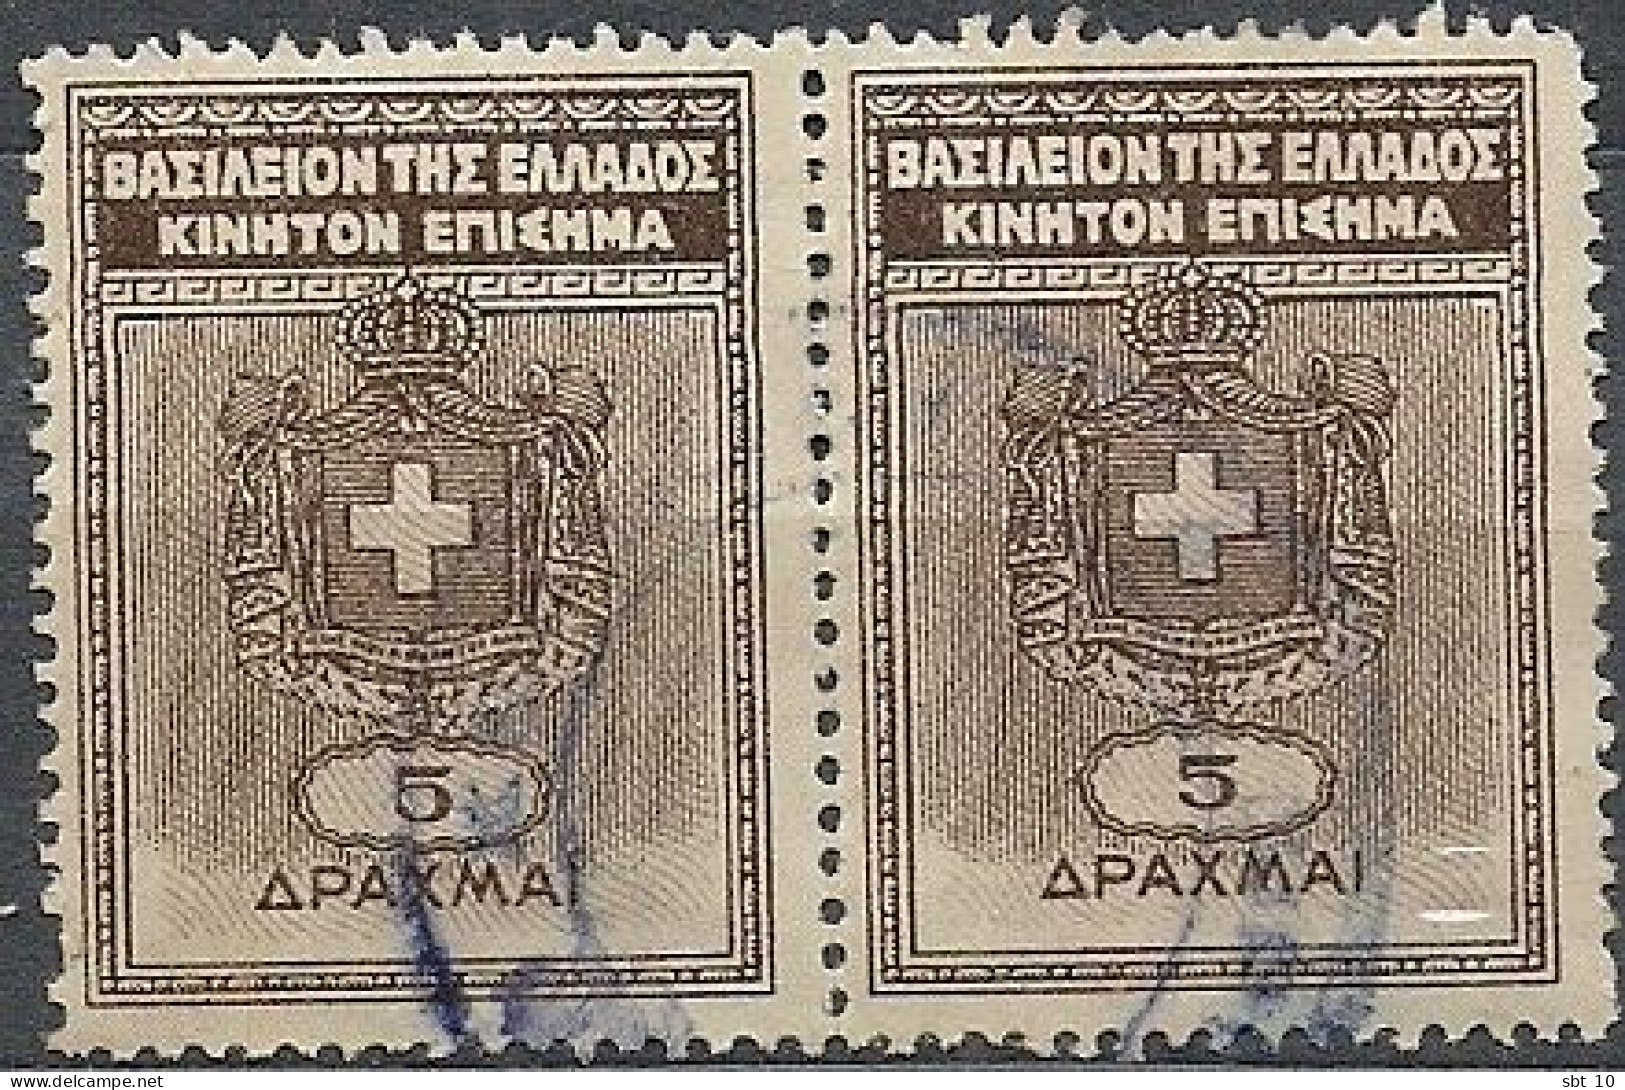 Greece - GREEK GENERAL REVENUES 5dr.X2 - Used - Revenue Stamps